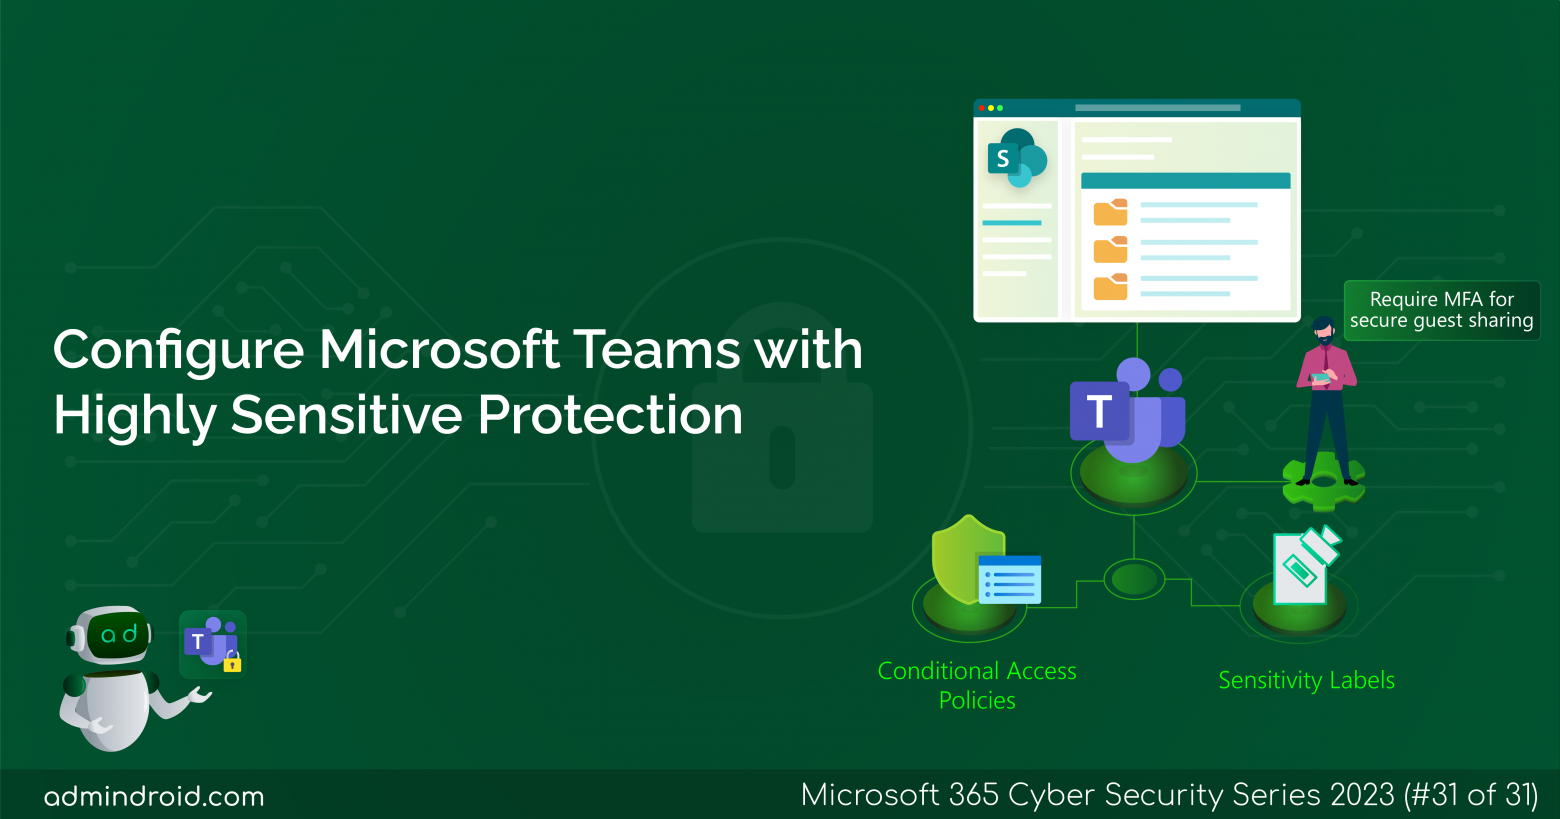 Configure Microsoft Teams with Highly Sensitive Protection